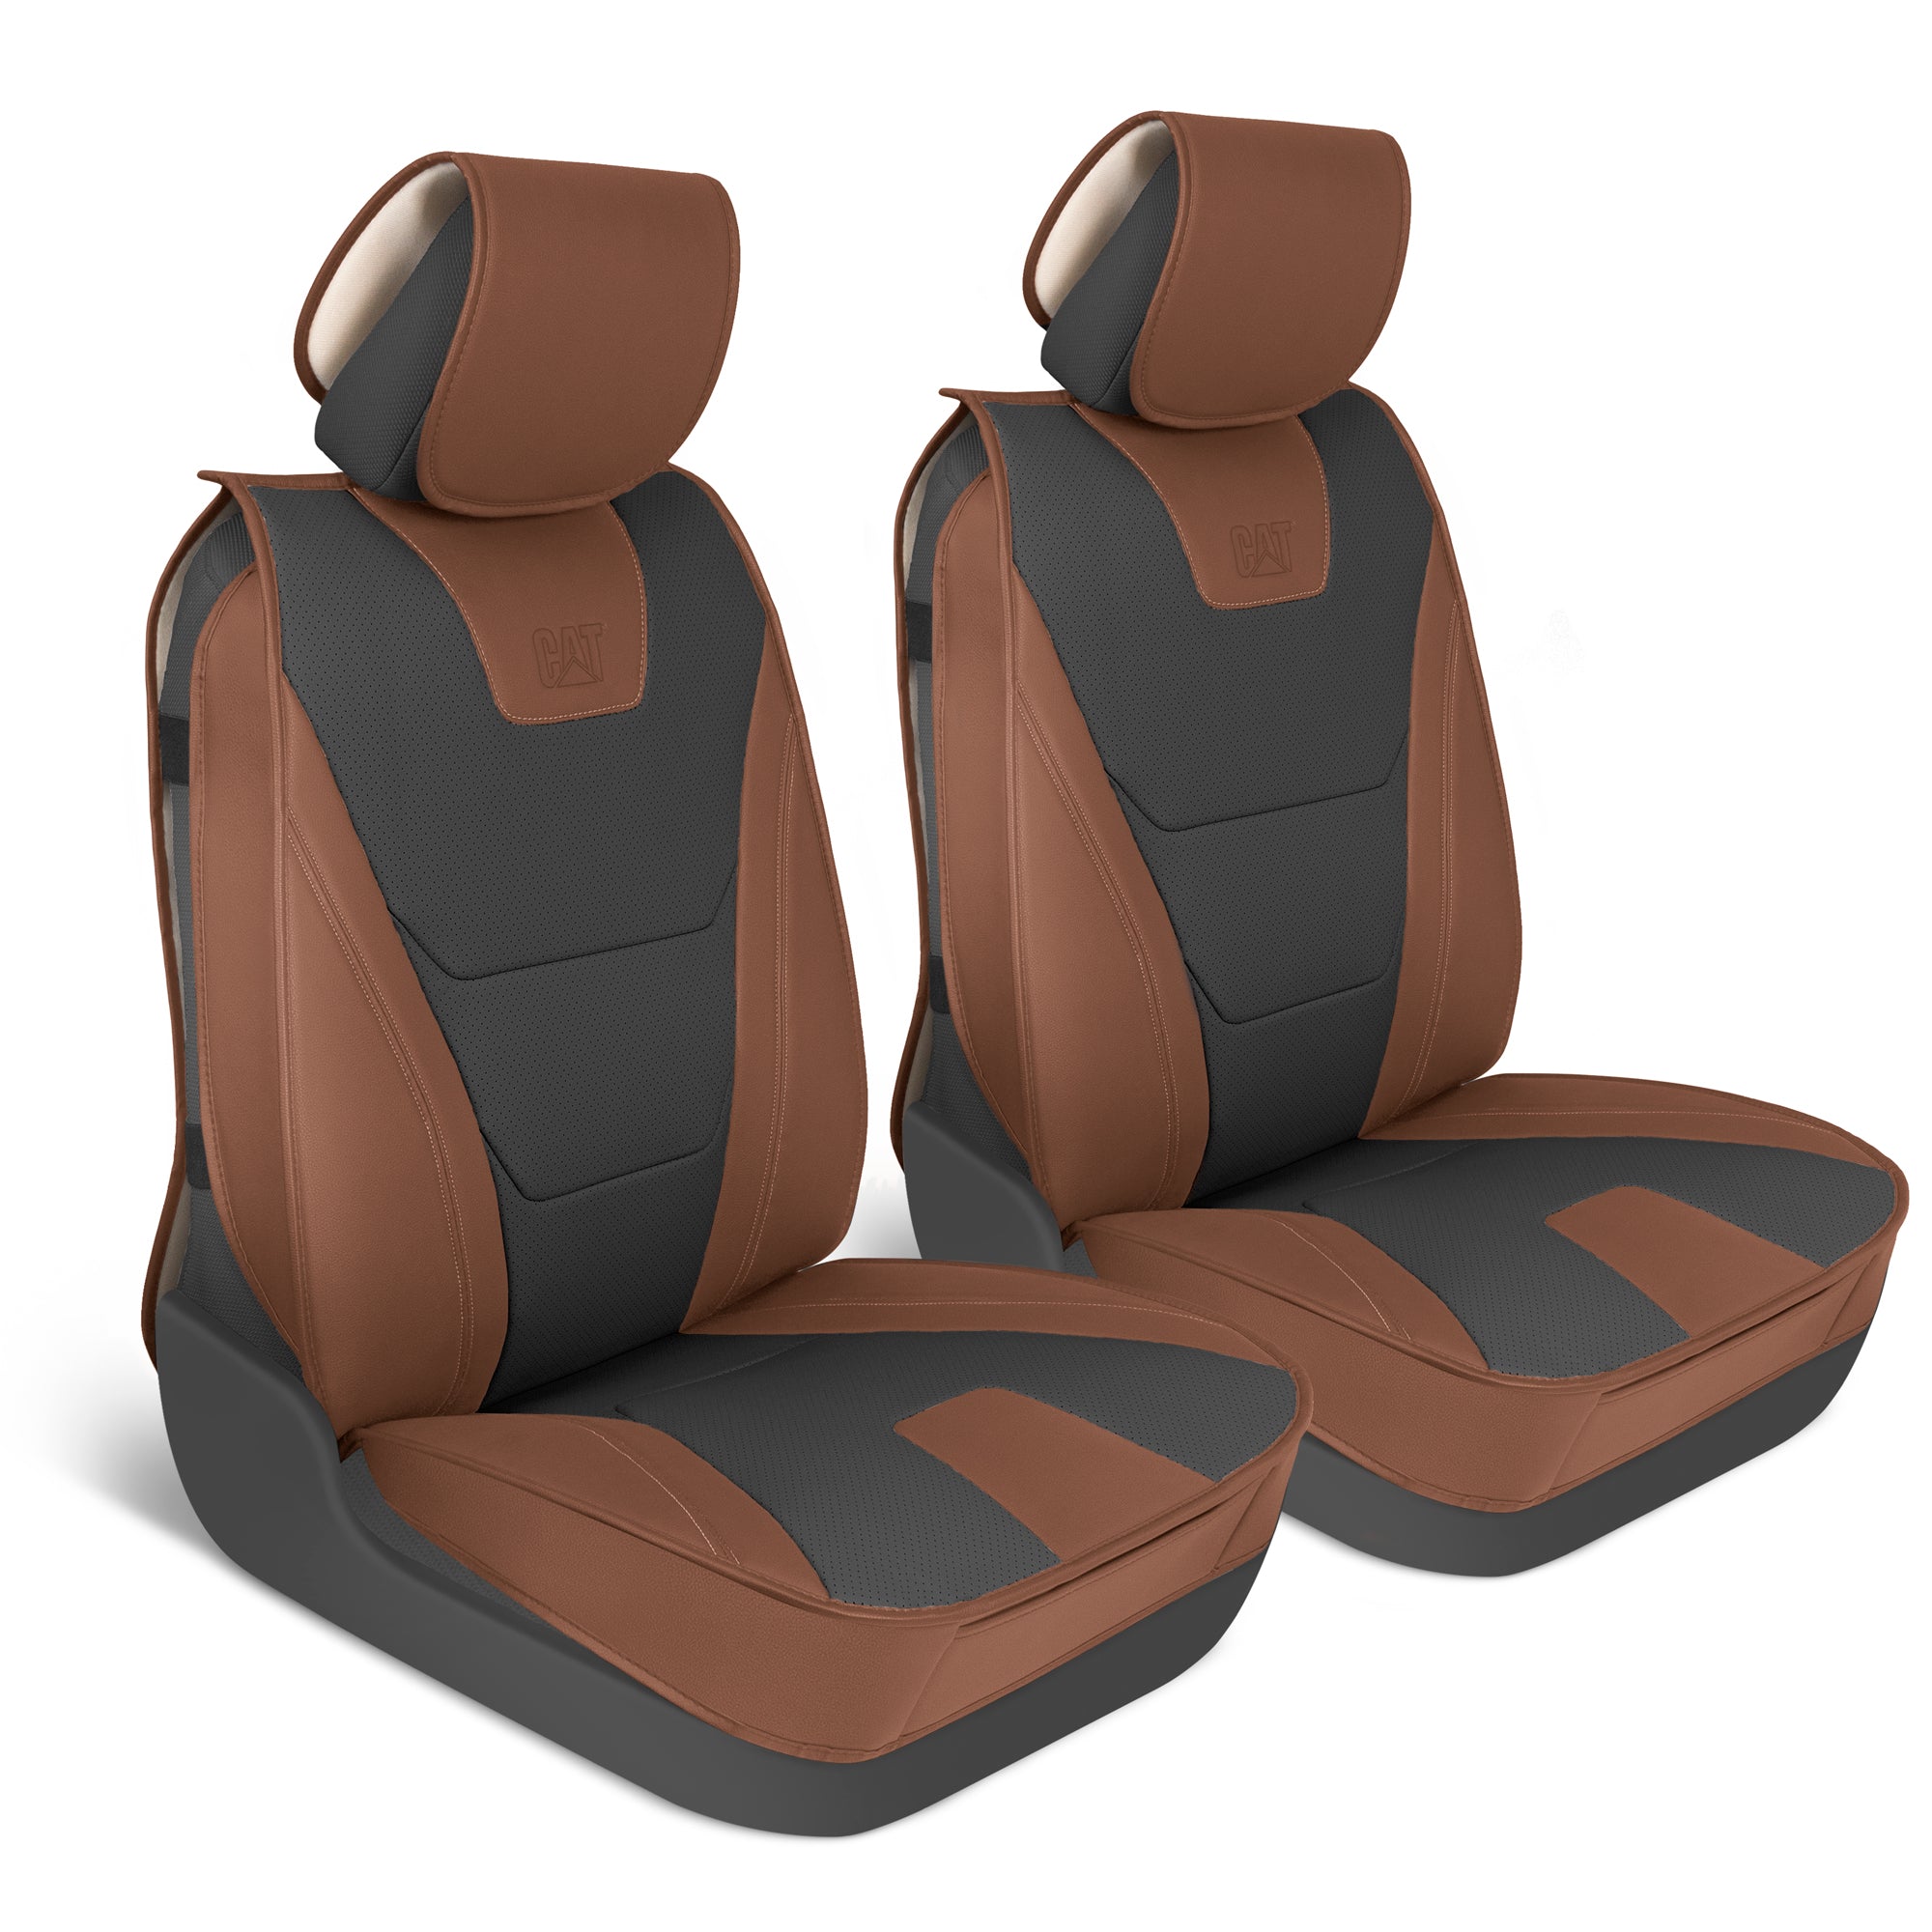 CAT 2-Pack EDGE Deluxe Front Seat Covers - Brown